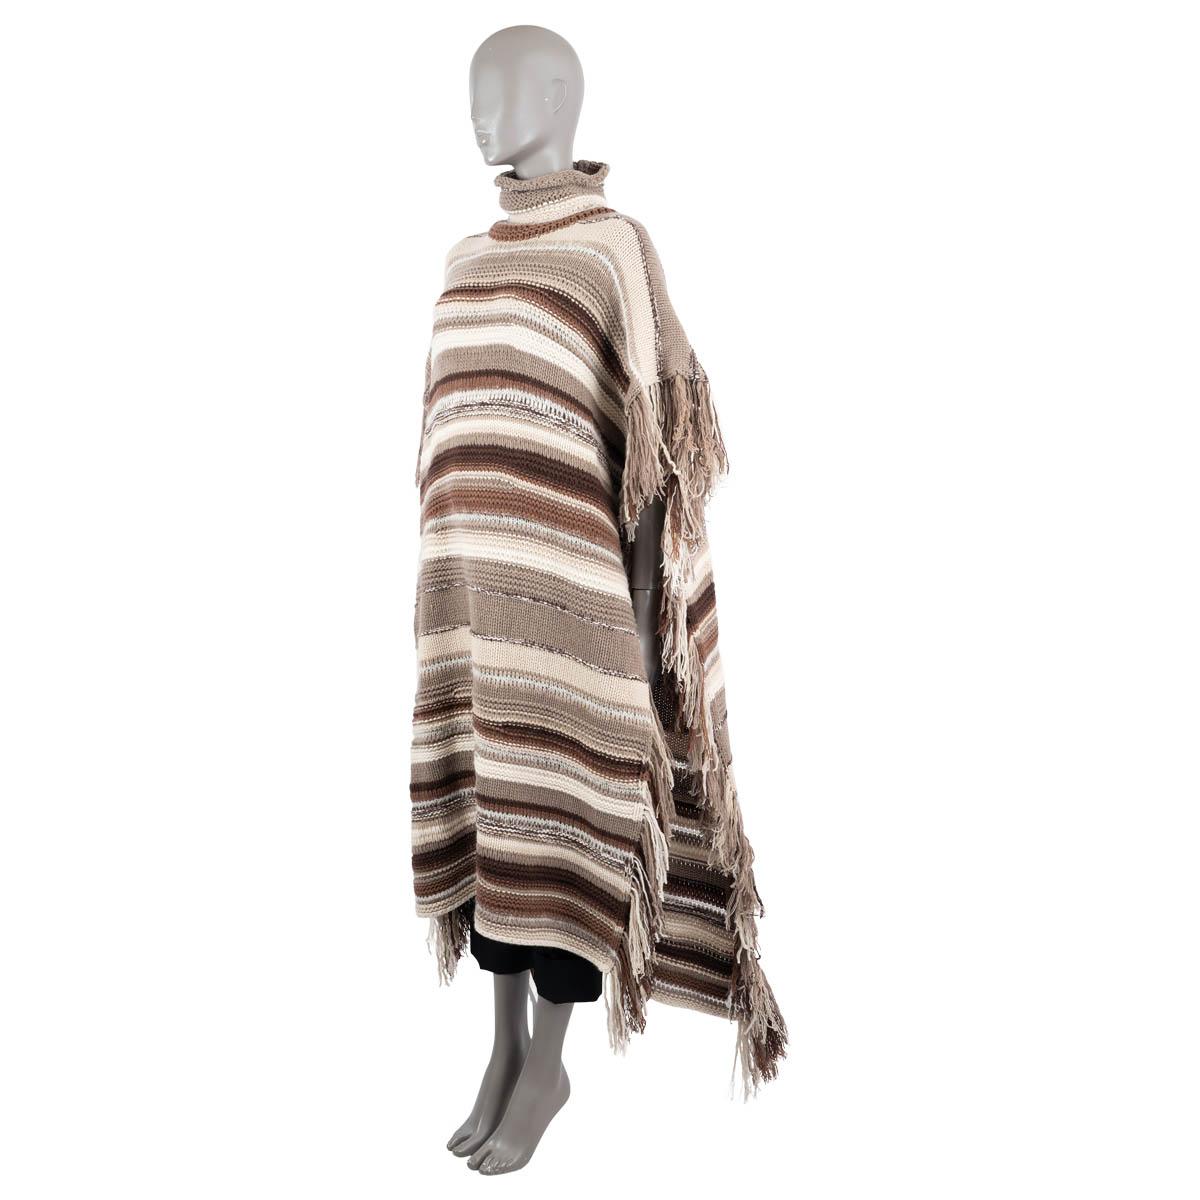 100% authentic Chloé oversized striped knit poncho in brown, taupe, ivory and sand cashmere (93%), wool (5%), alpaca wool (1%) and polyamide (1%). The design features fringed trims and is made of mid-weight knit. Unlined. Has been worn and is in